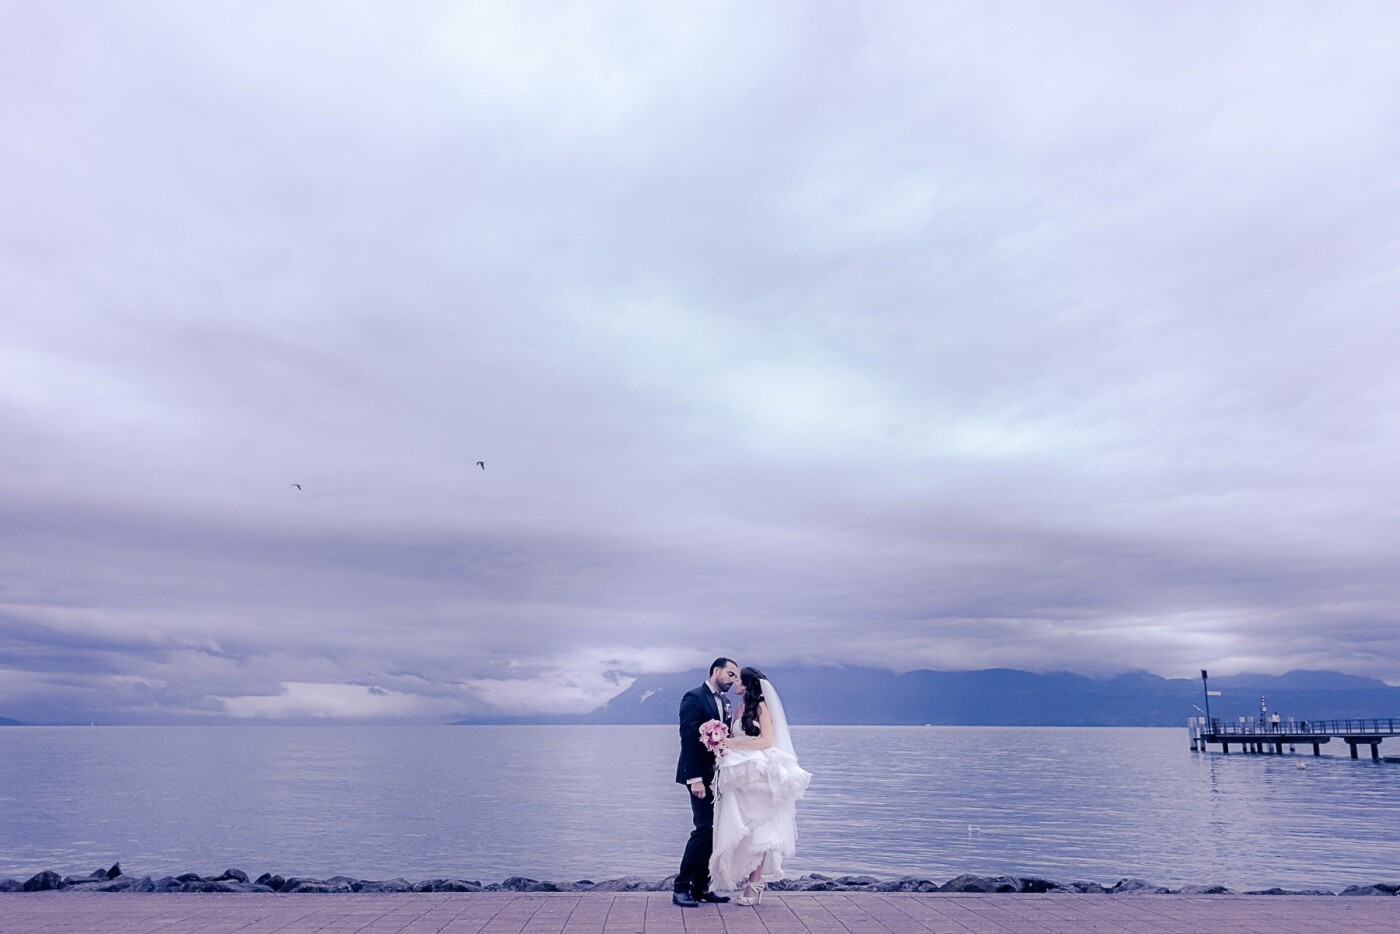 I can’t think of a single bride on earth who wouldn’t get a little nervous in prospect of a rainy day wedding. But who said rainy day weddings photographs can’t be just as intense as the idyllic blue skies shots? Passion doesn't fear bad weather, nor does creativity.<br />
As the ceremony ended, the skies above the Leman Lake (or Lake Geneva, Switzerland) started to get darker and darker, until it literally started pouring with rain. I could see the disappointment on the bride and groom’s faces. But their love, their happiness and the infinite beauty of that day were way above the quirks of nature.<br />
As the rain calmed down, the panorama revealed its magic. The skies were as dramatic and the couple’s look at each other. The clouds were as soft and ruffled as the bride’s dress when she held it above the floor. The lake and the mountains were as mysterious and intense as the million feelings that seemed to run through the bride and groom’s bodies and souls.<br />
Soulmates. That’s all I can think of.